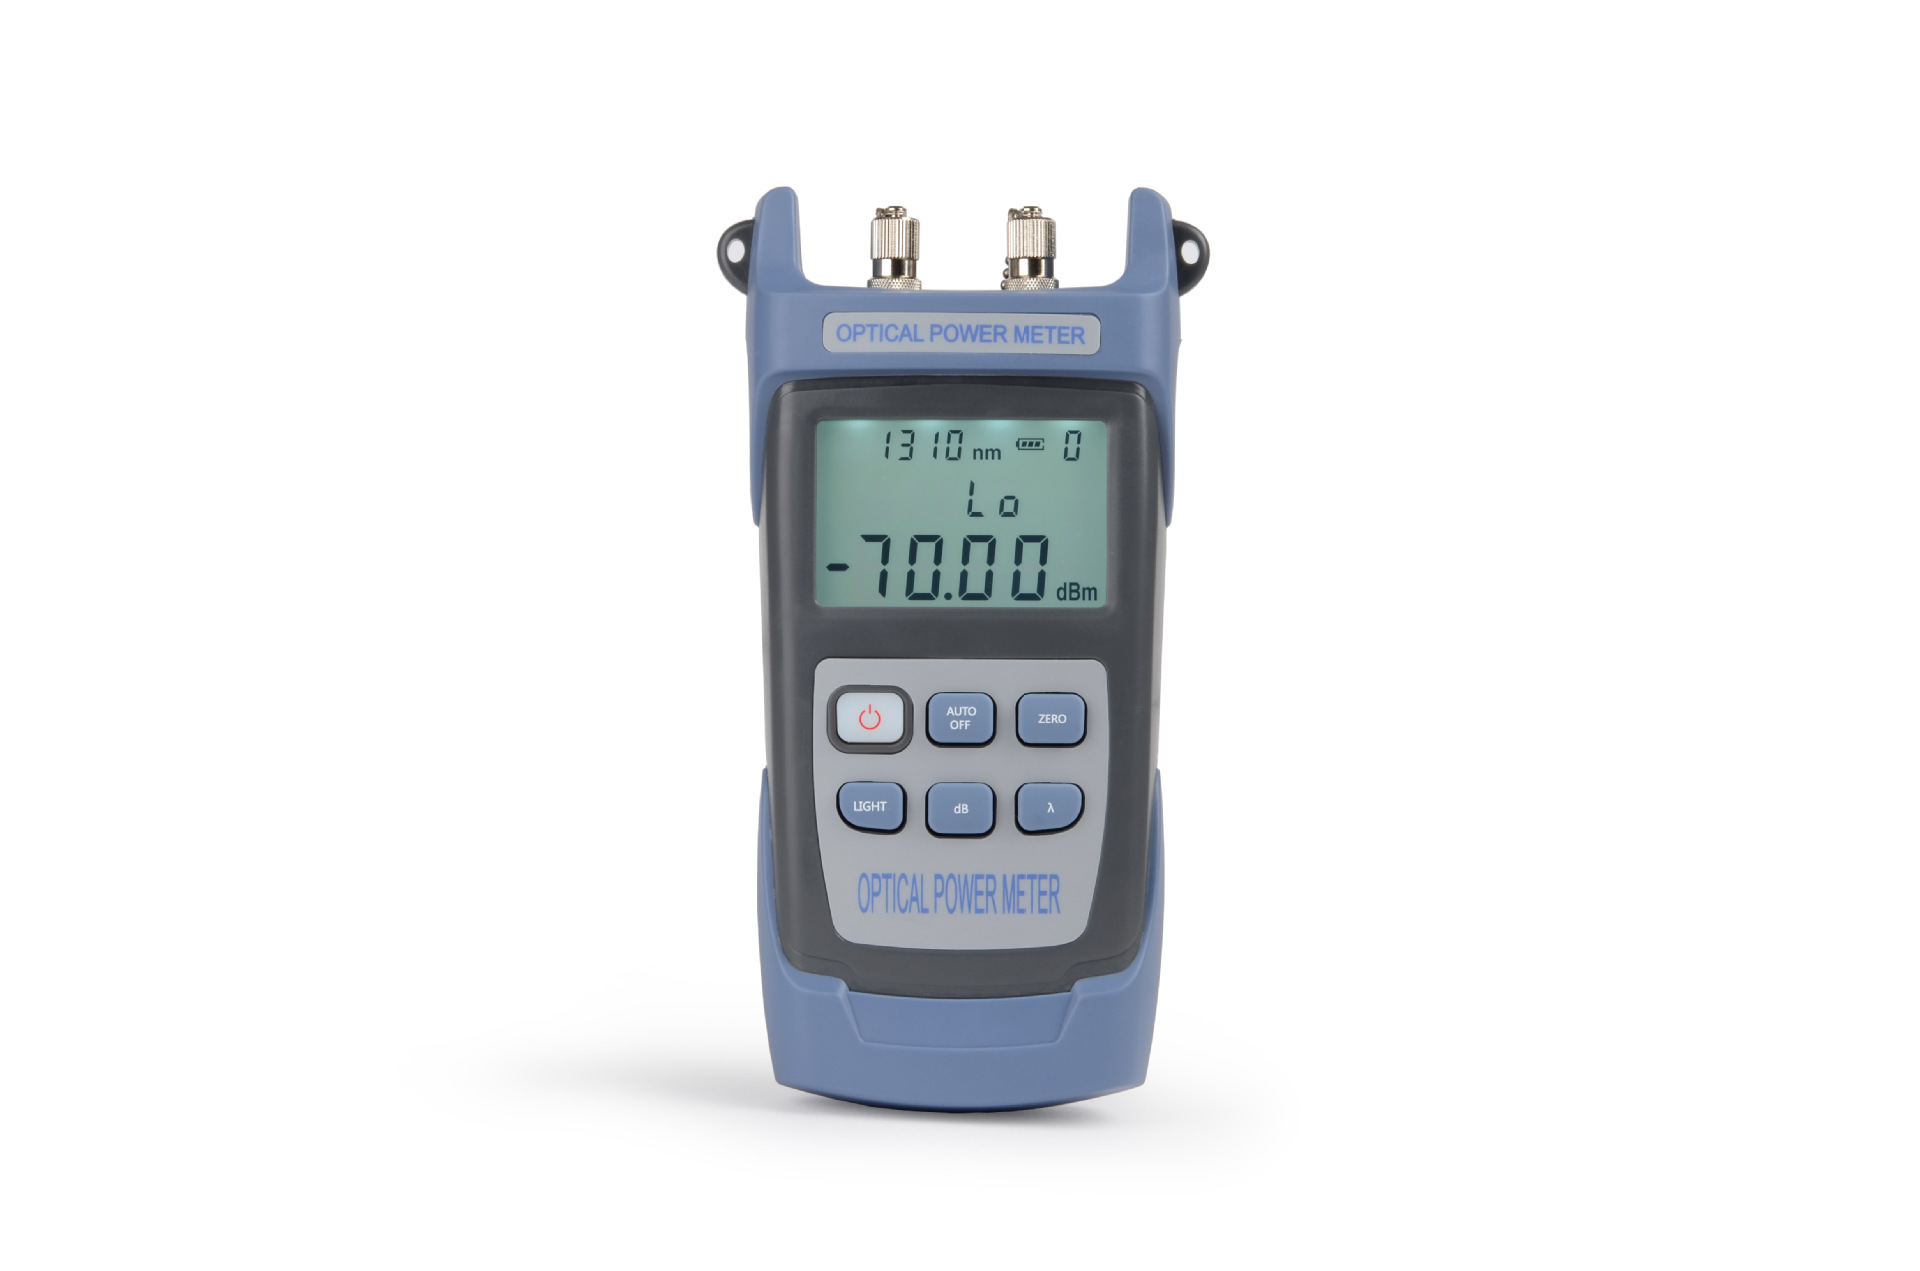 What are the precautions for using the optical power meter?